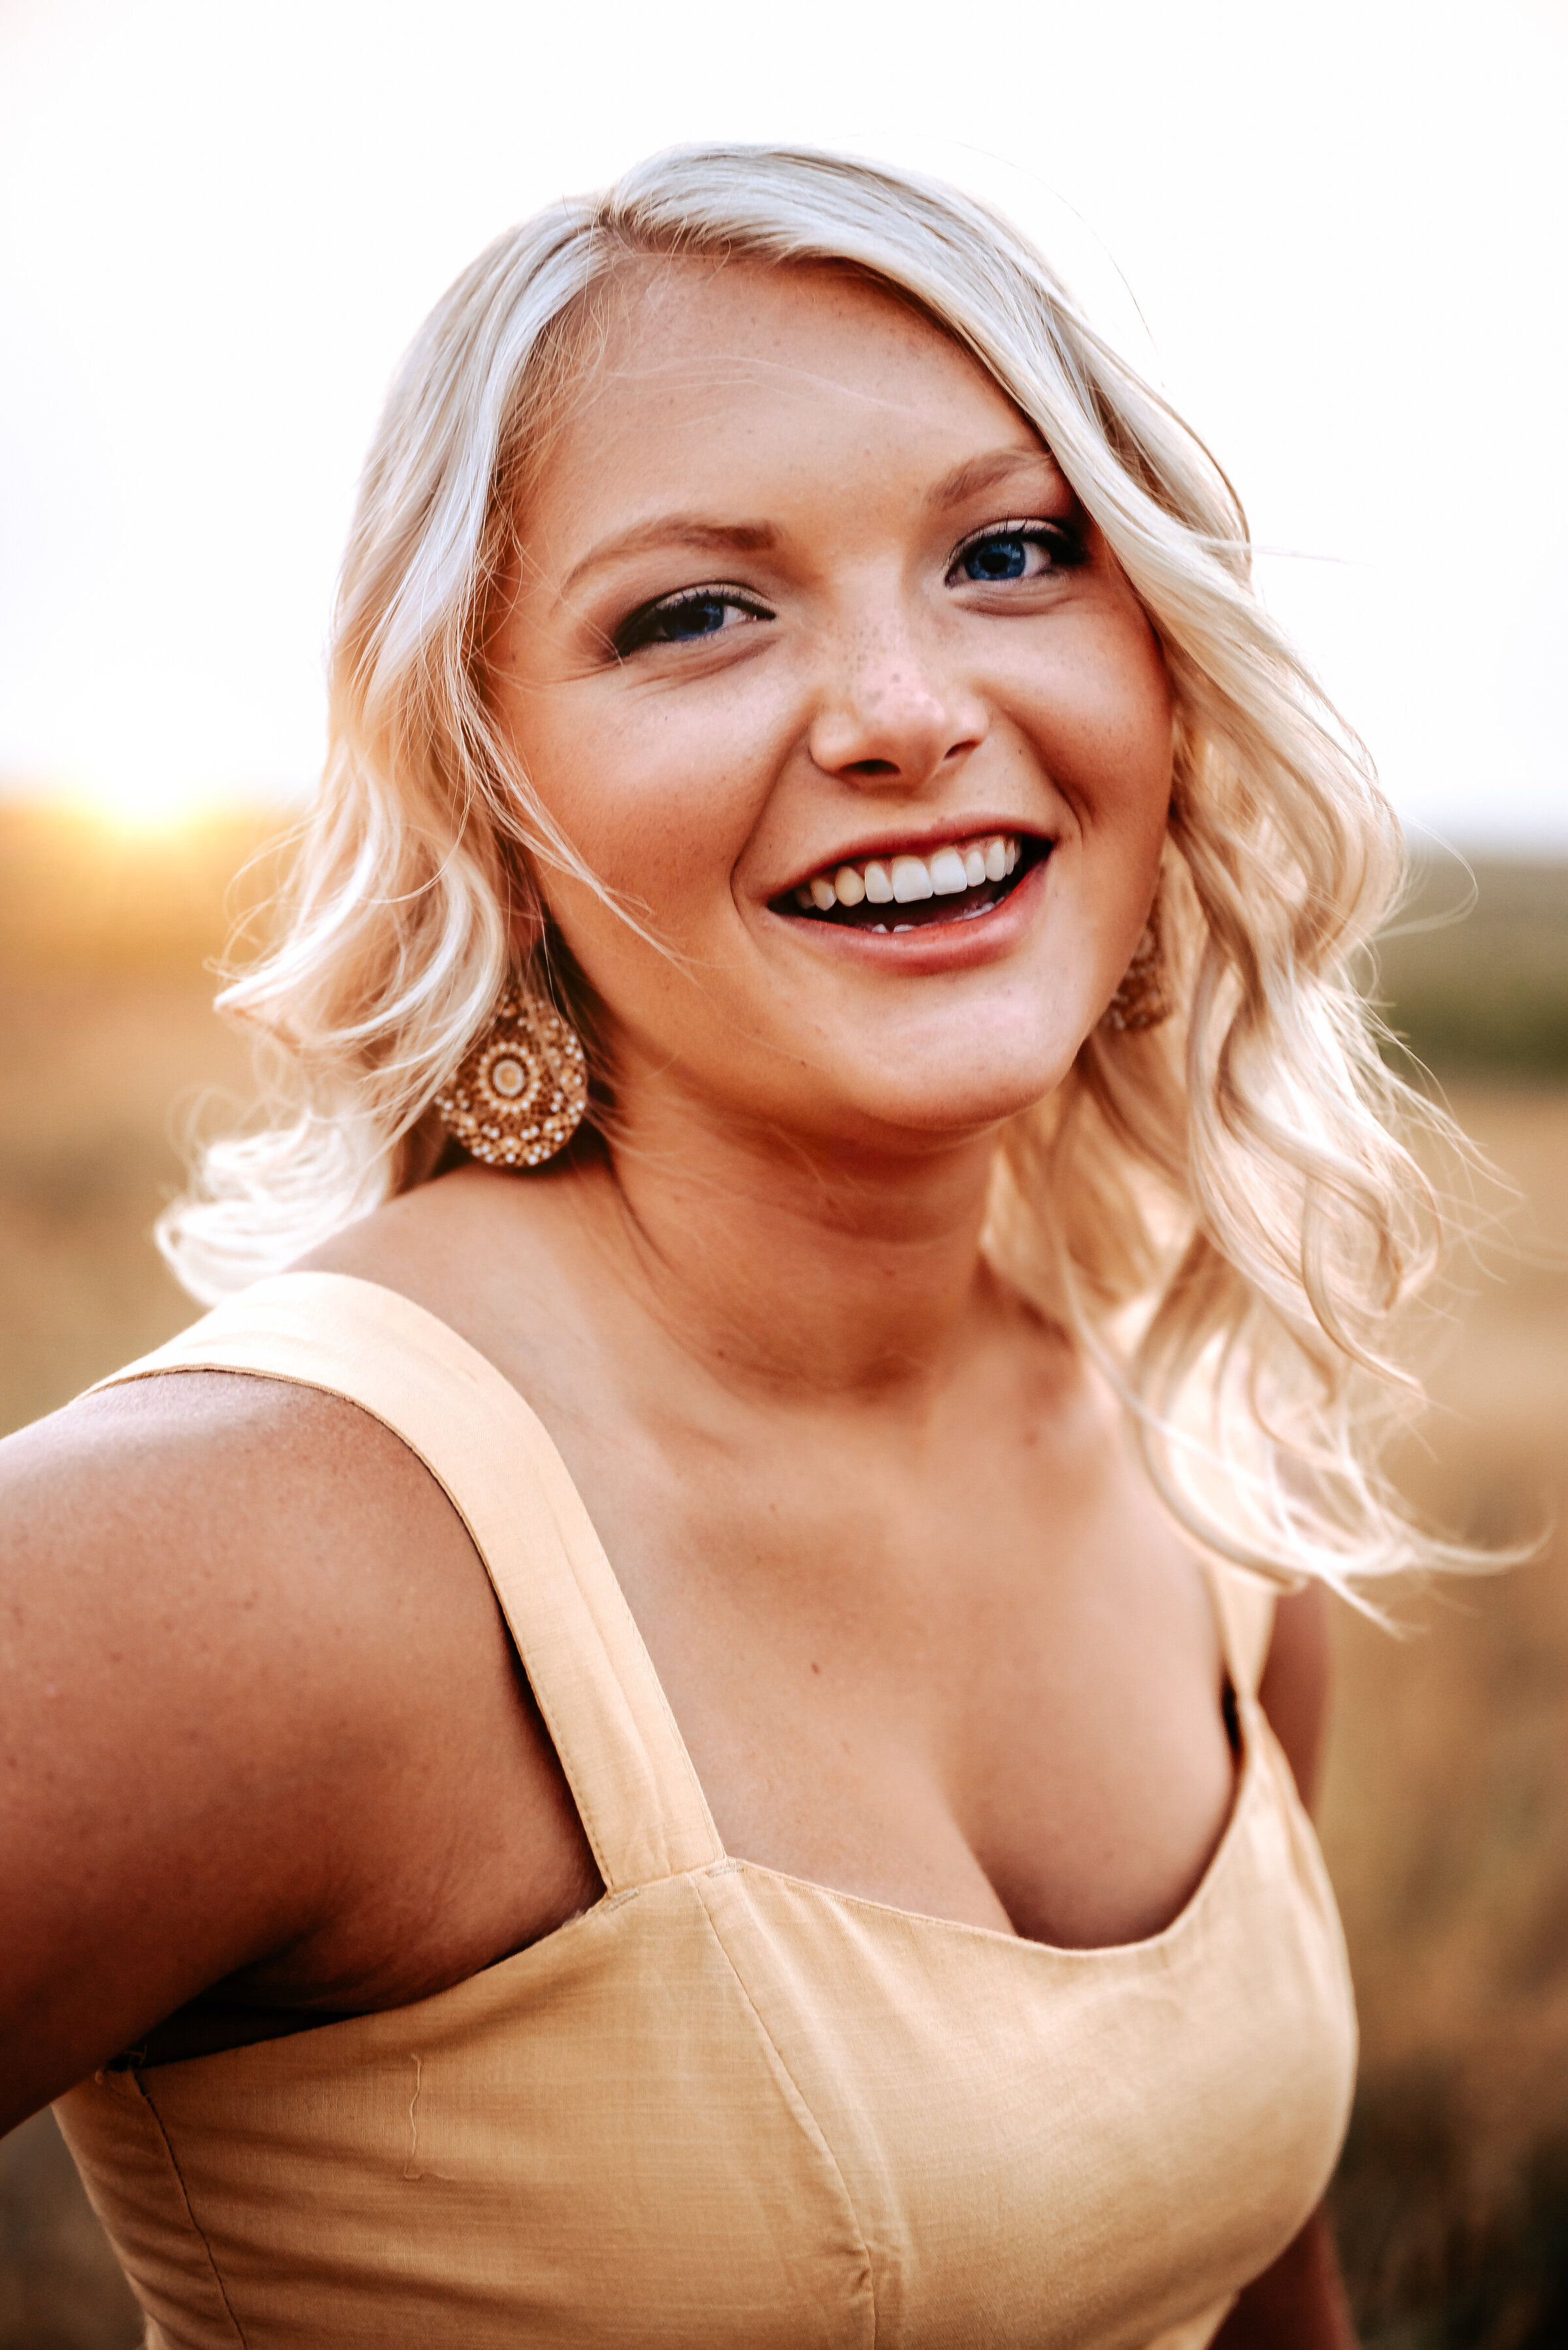 laughing senior photos that look natural while girl wears yellow dress